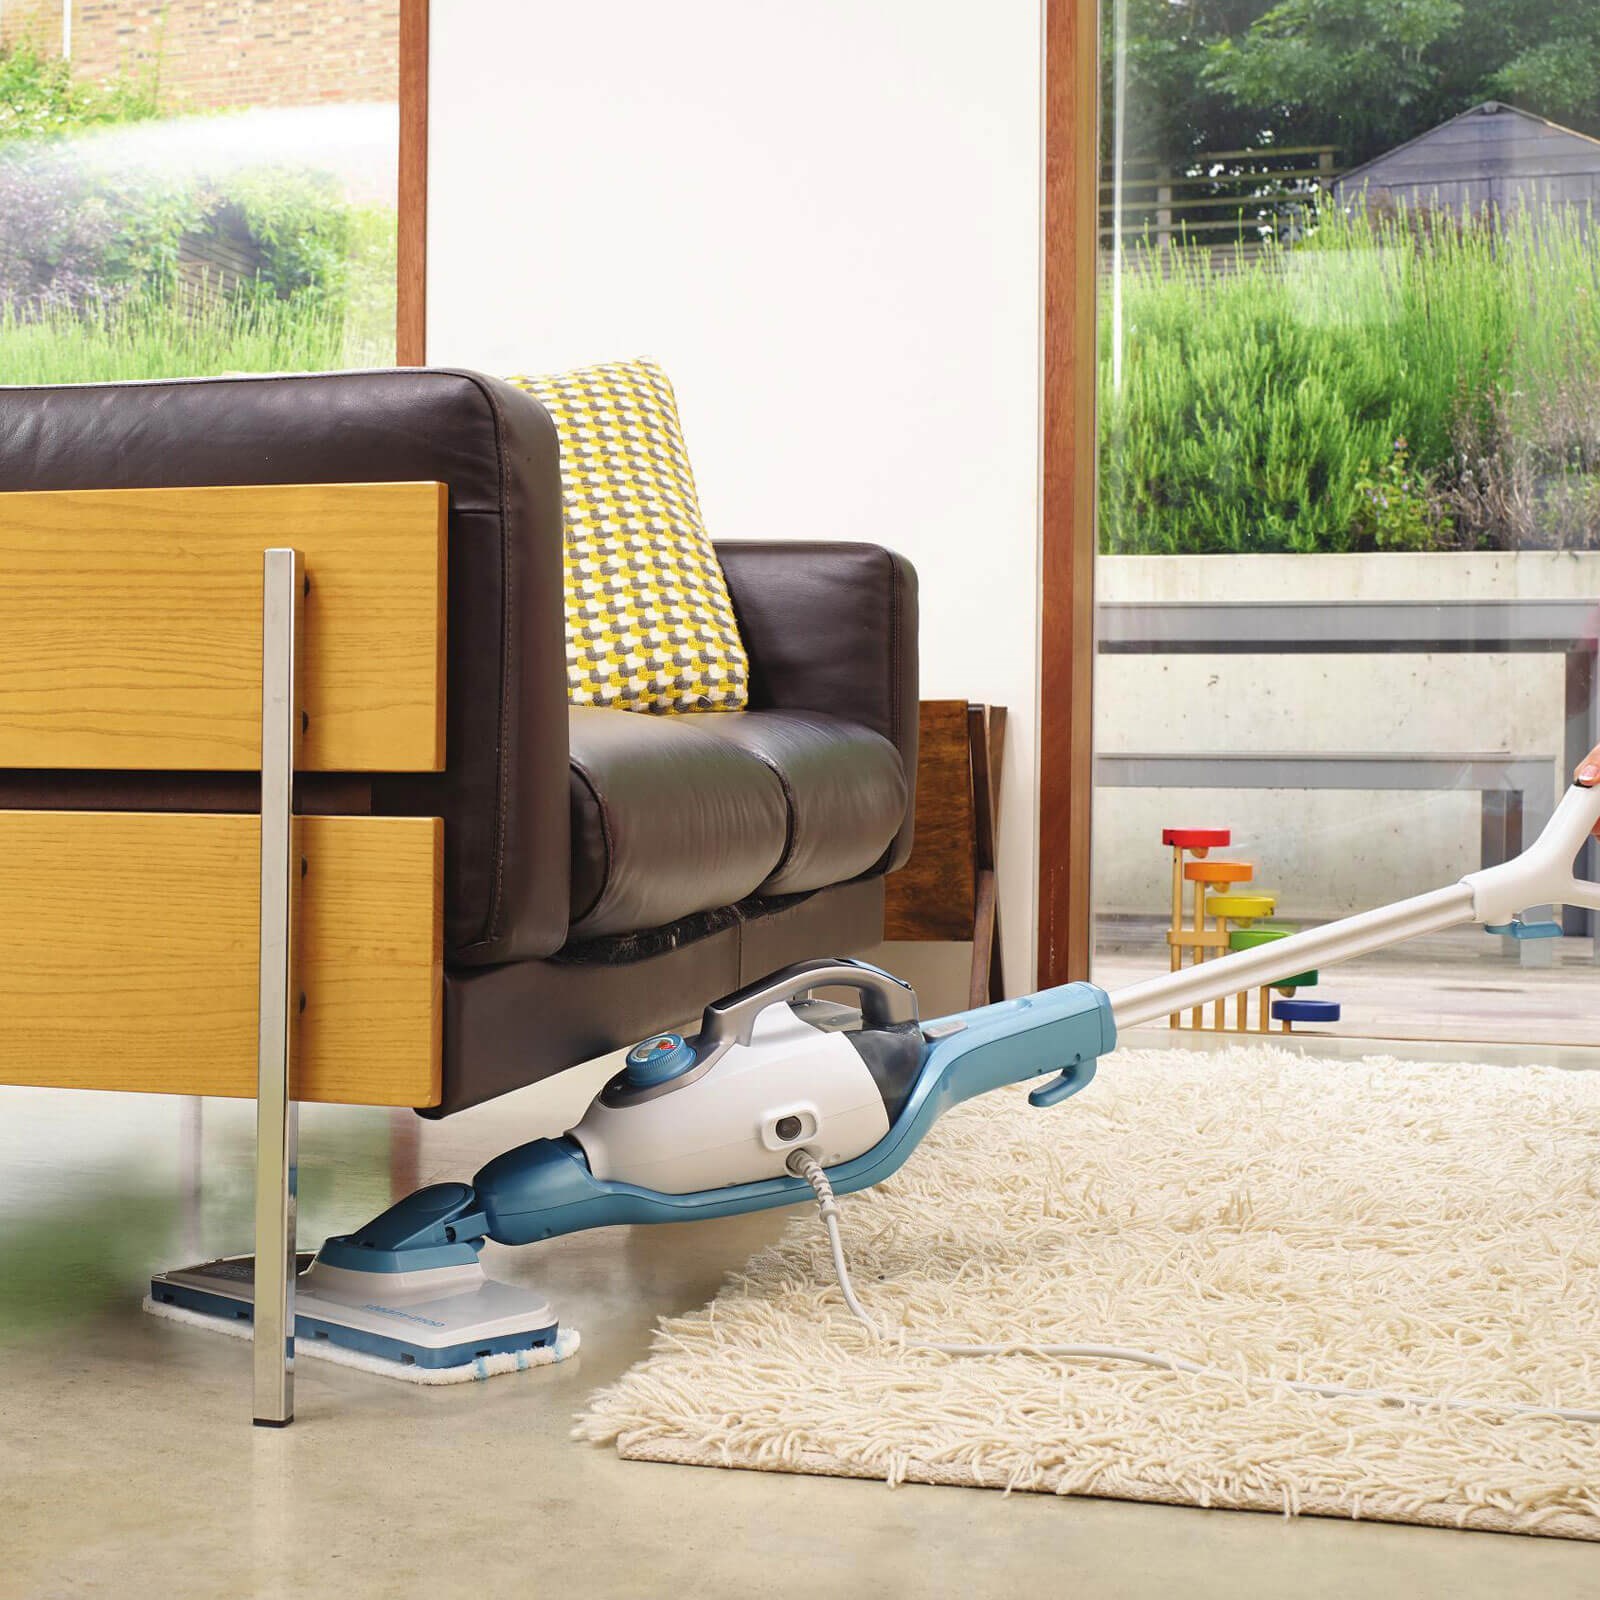 BLACK+DECKER Steam Cleaners & Mops at